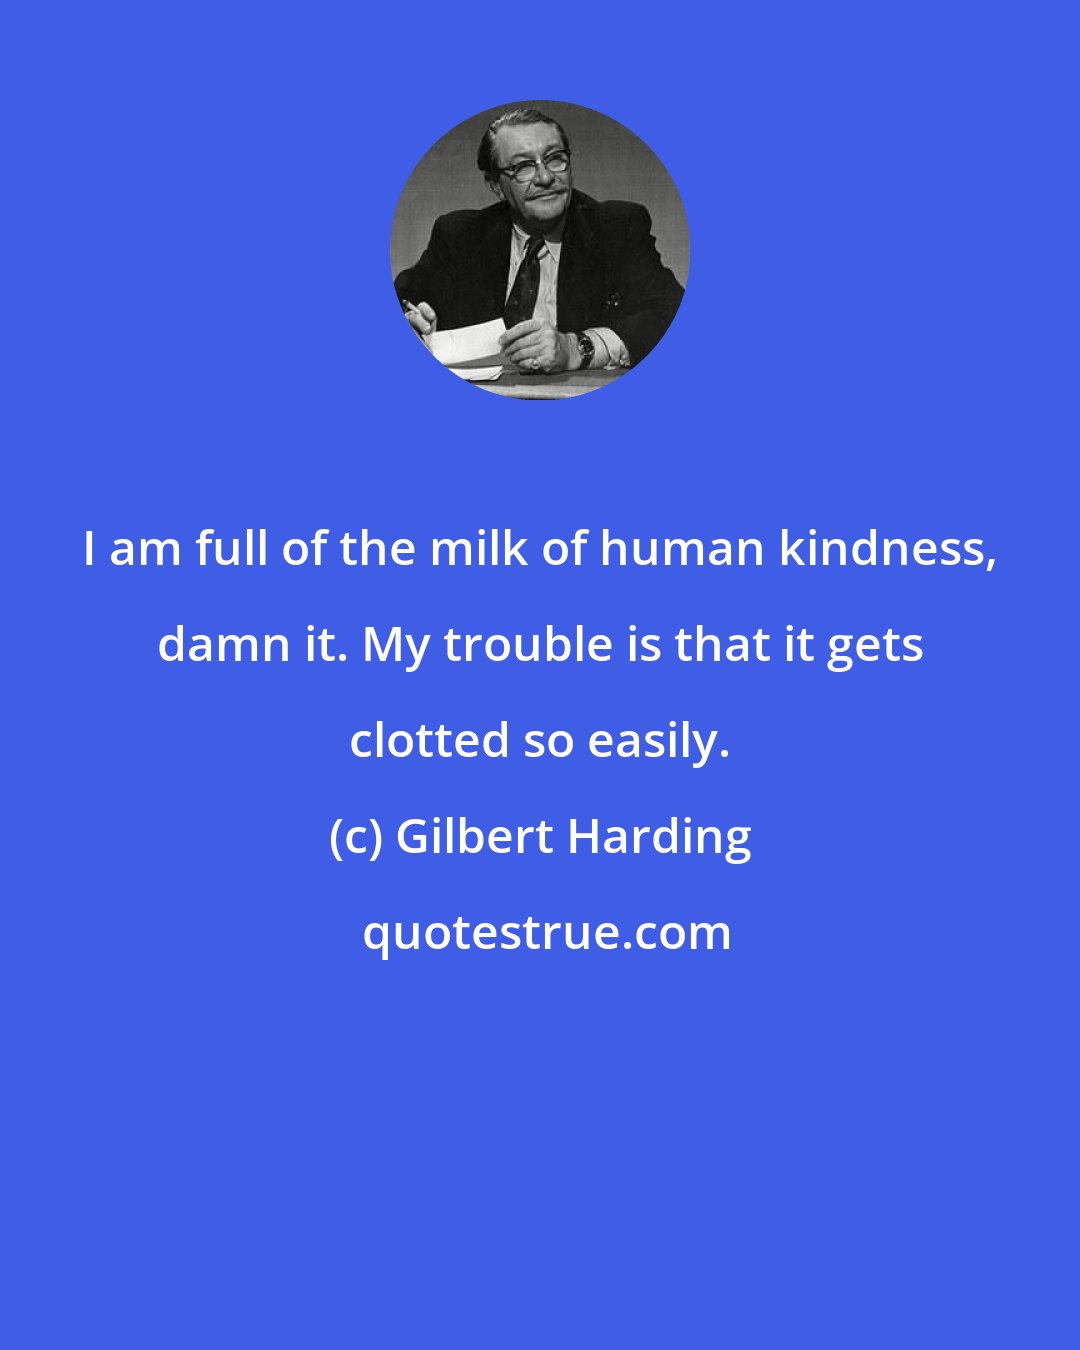 Gilbert Harding: I am full of the milk of human kindness, damn it. My trouble is that it gets clotted so easily.